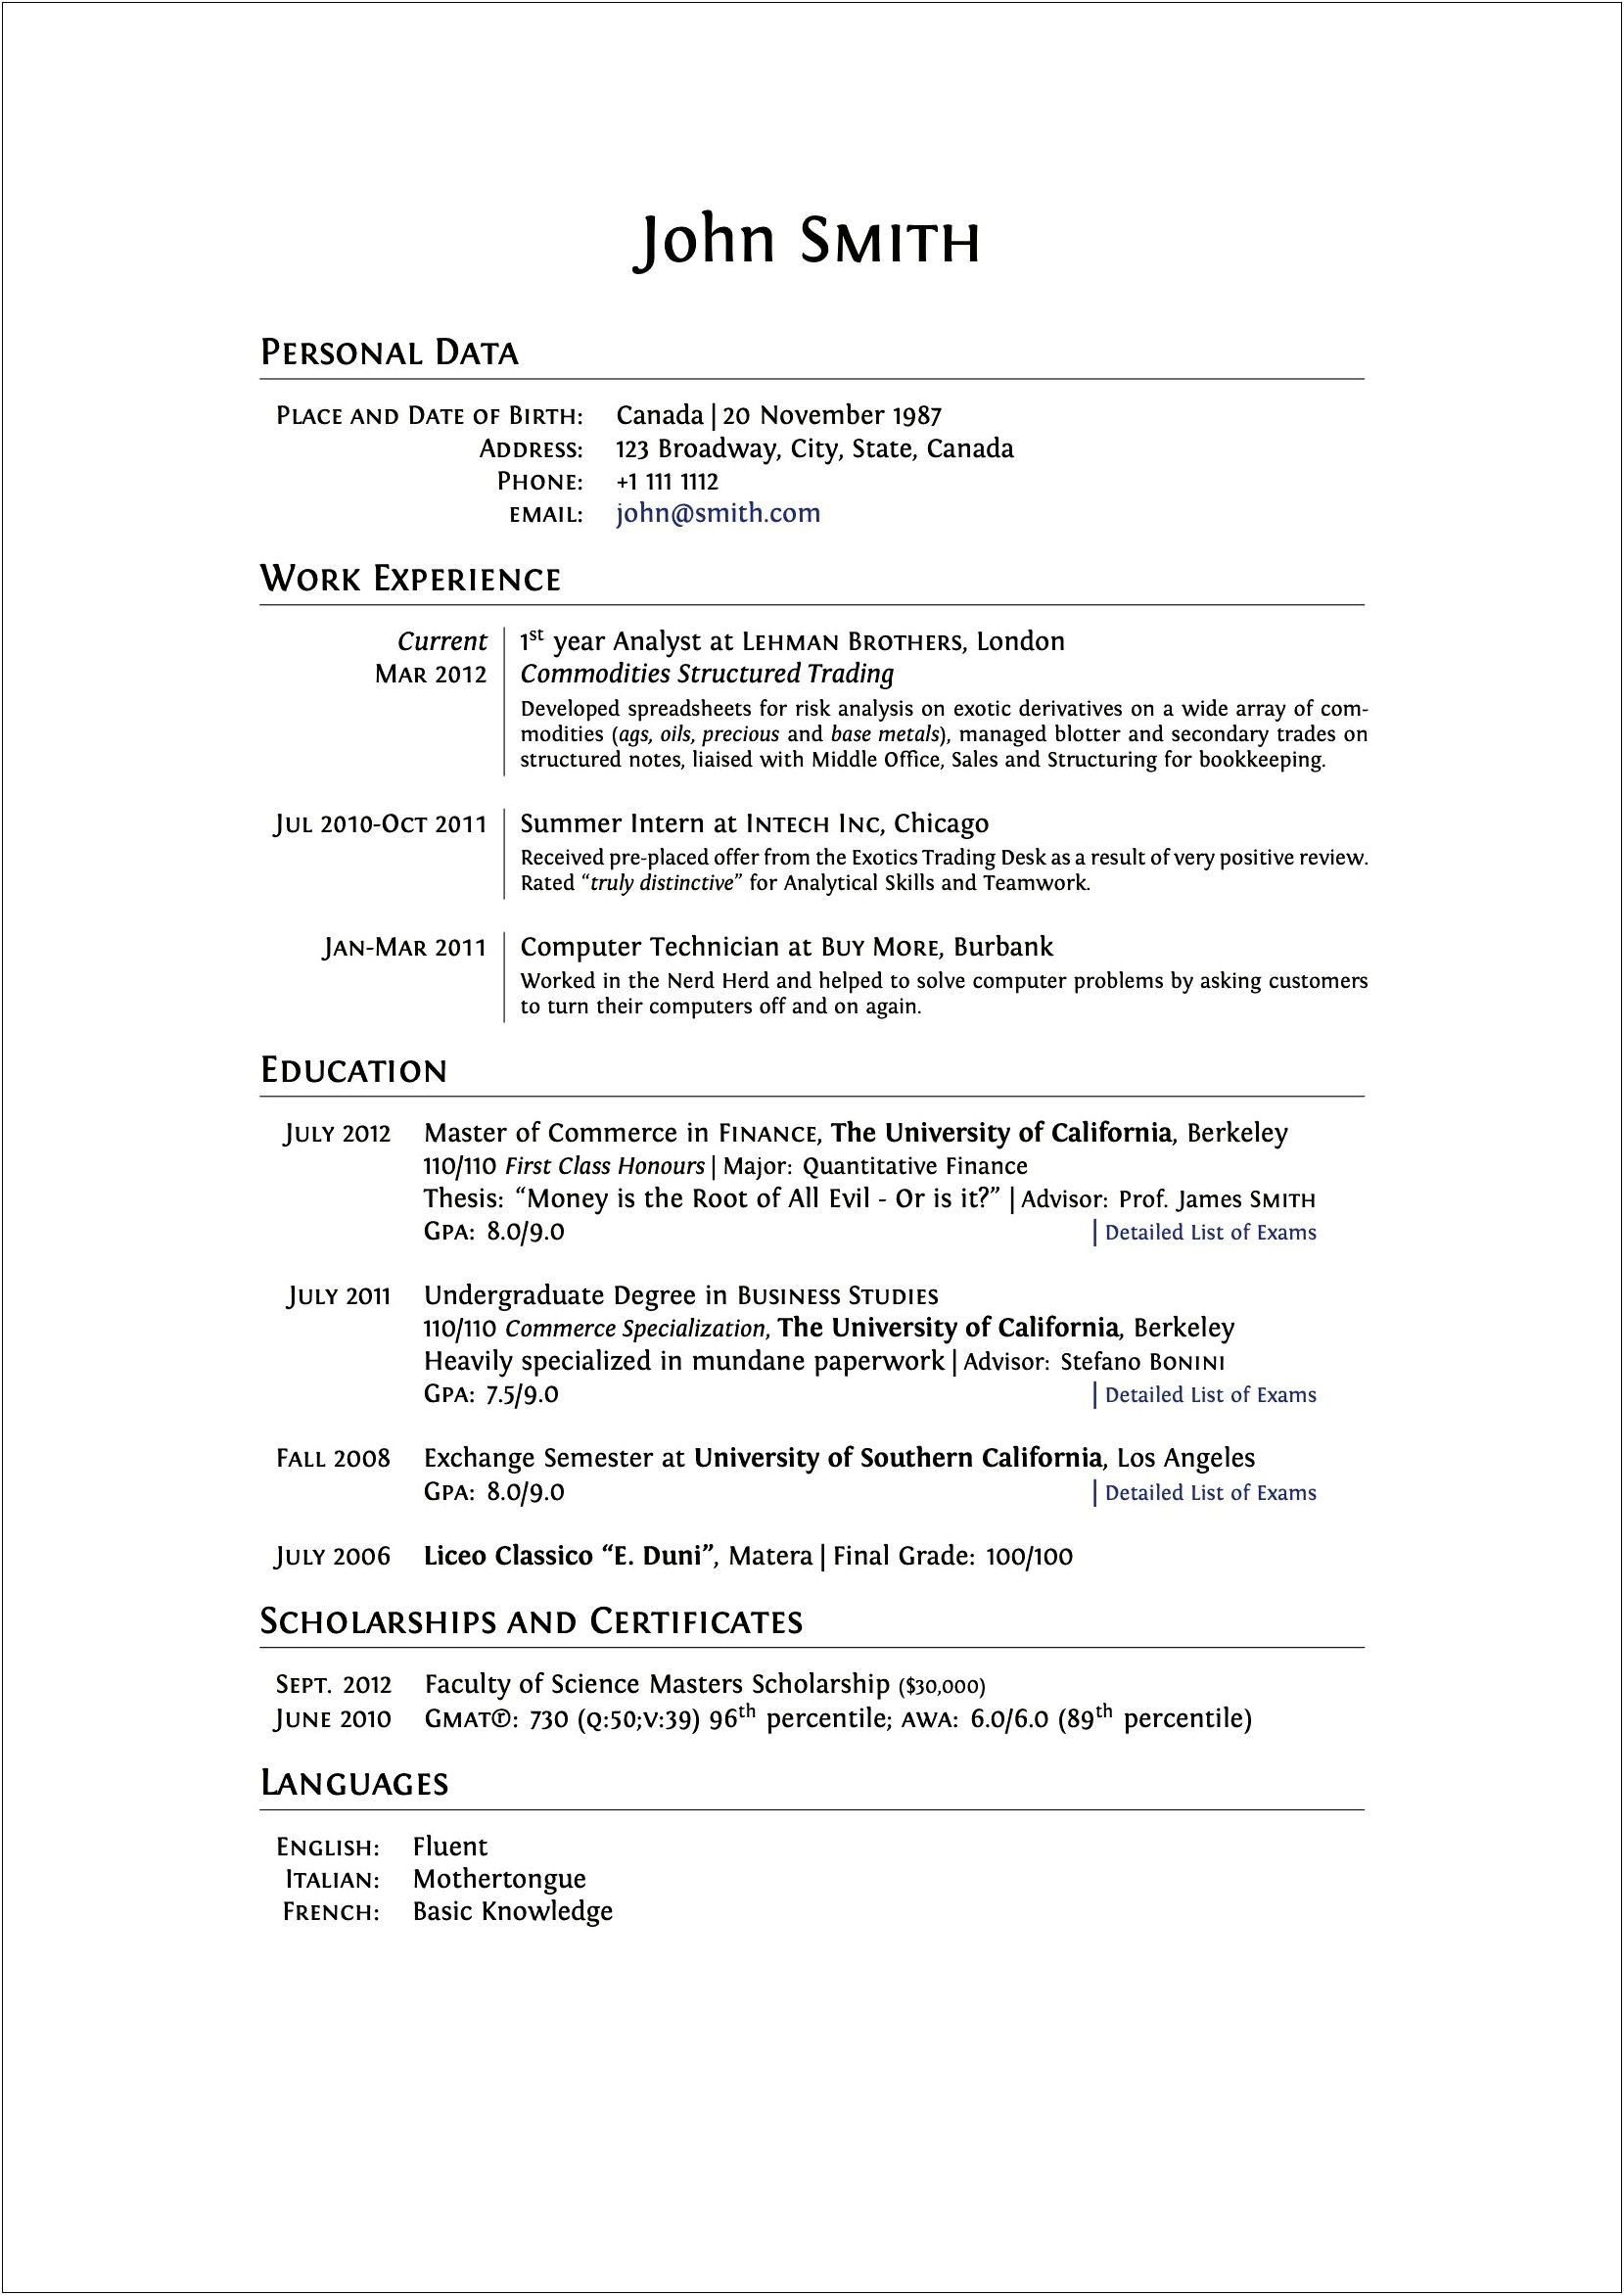 Proessional Resume List Education Or Experience First